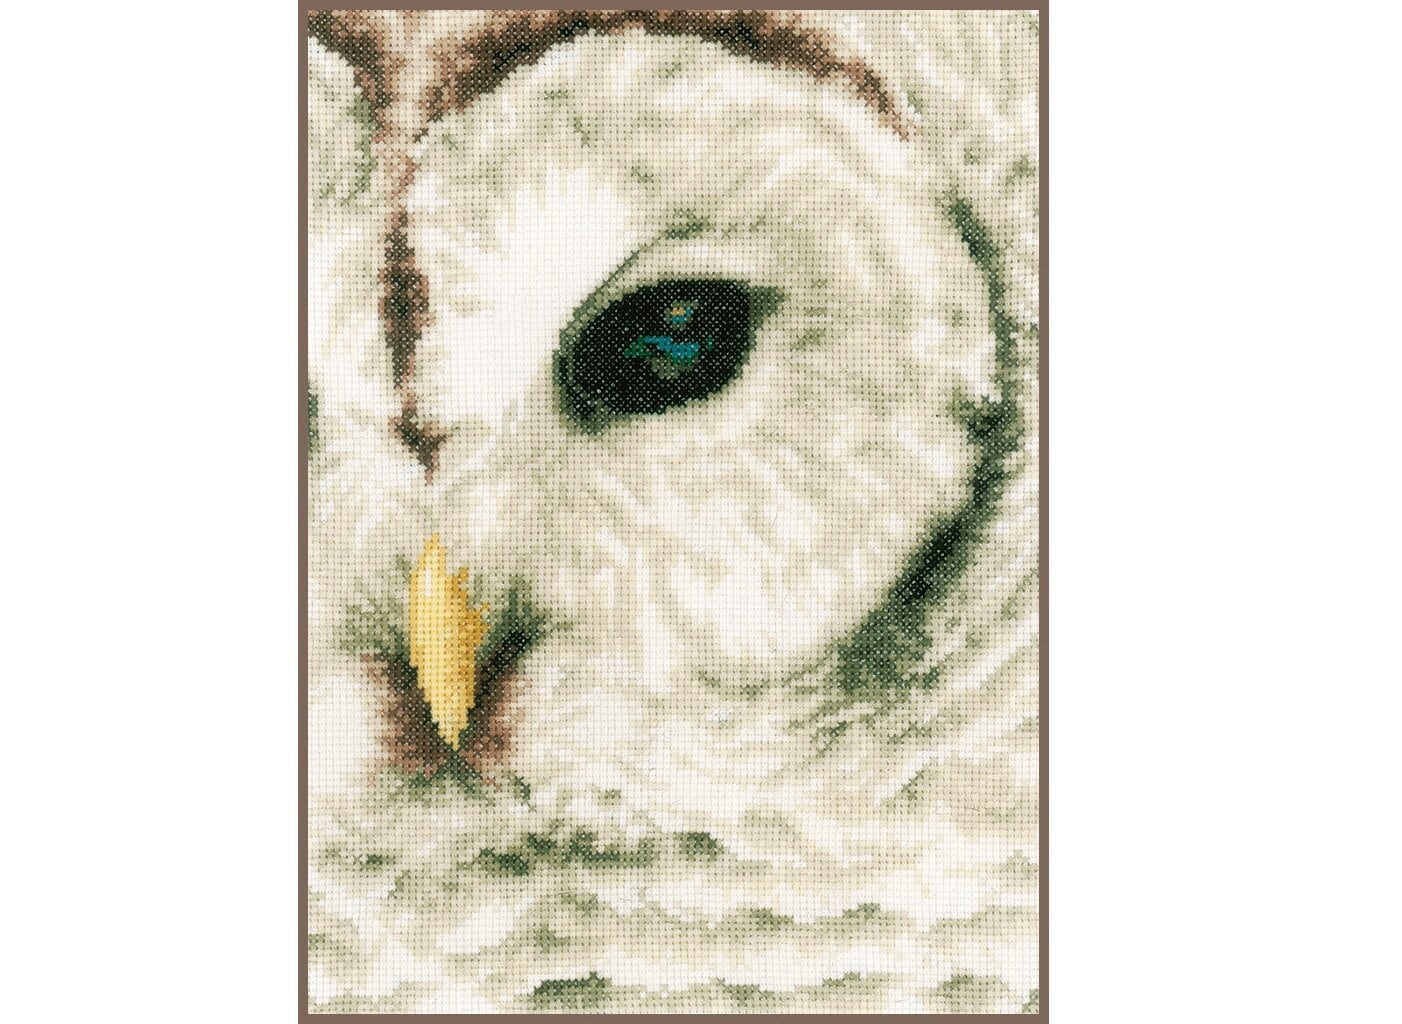 PDF Counted Cross Stitch Wise Owl / Owl Cross Stitch, Diy, Embroidery,  Pattern, Gift, Library, Librarian Gift, Kids, Books, Reading 